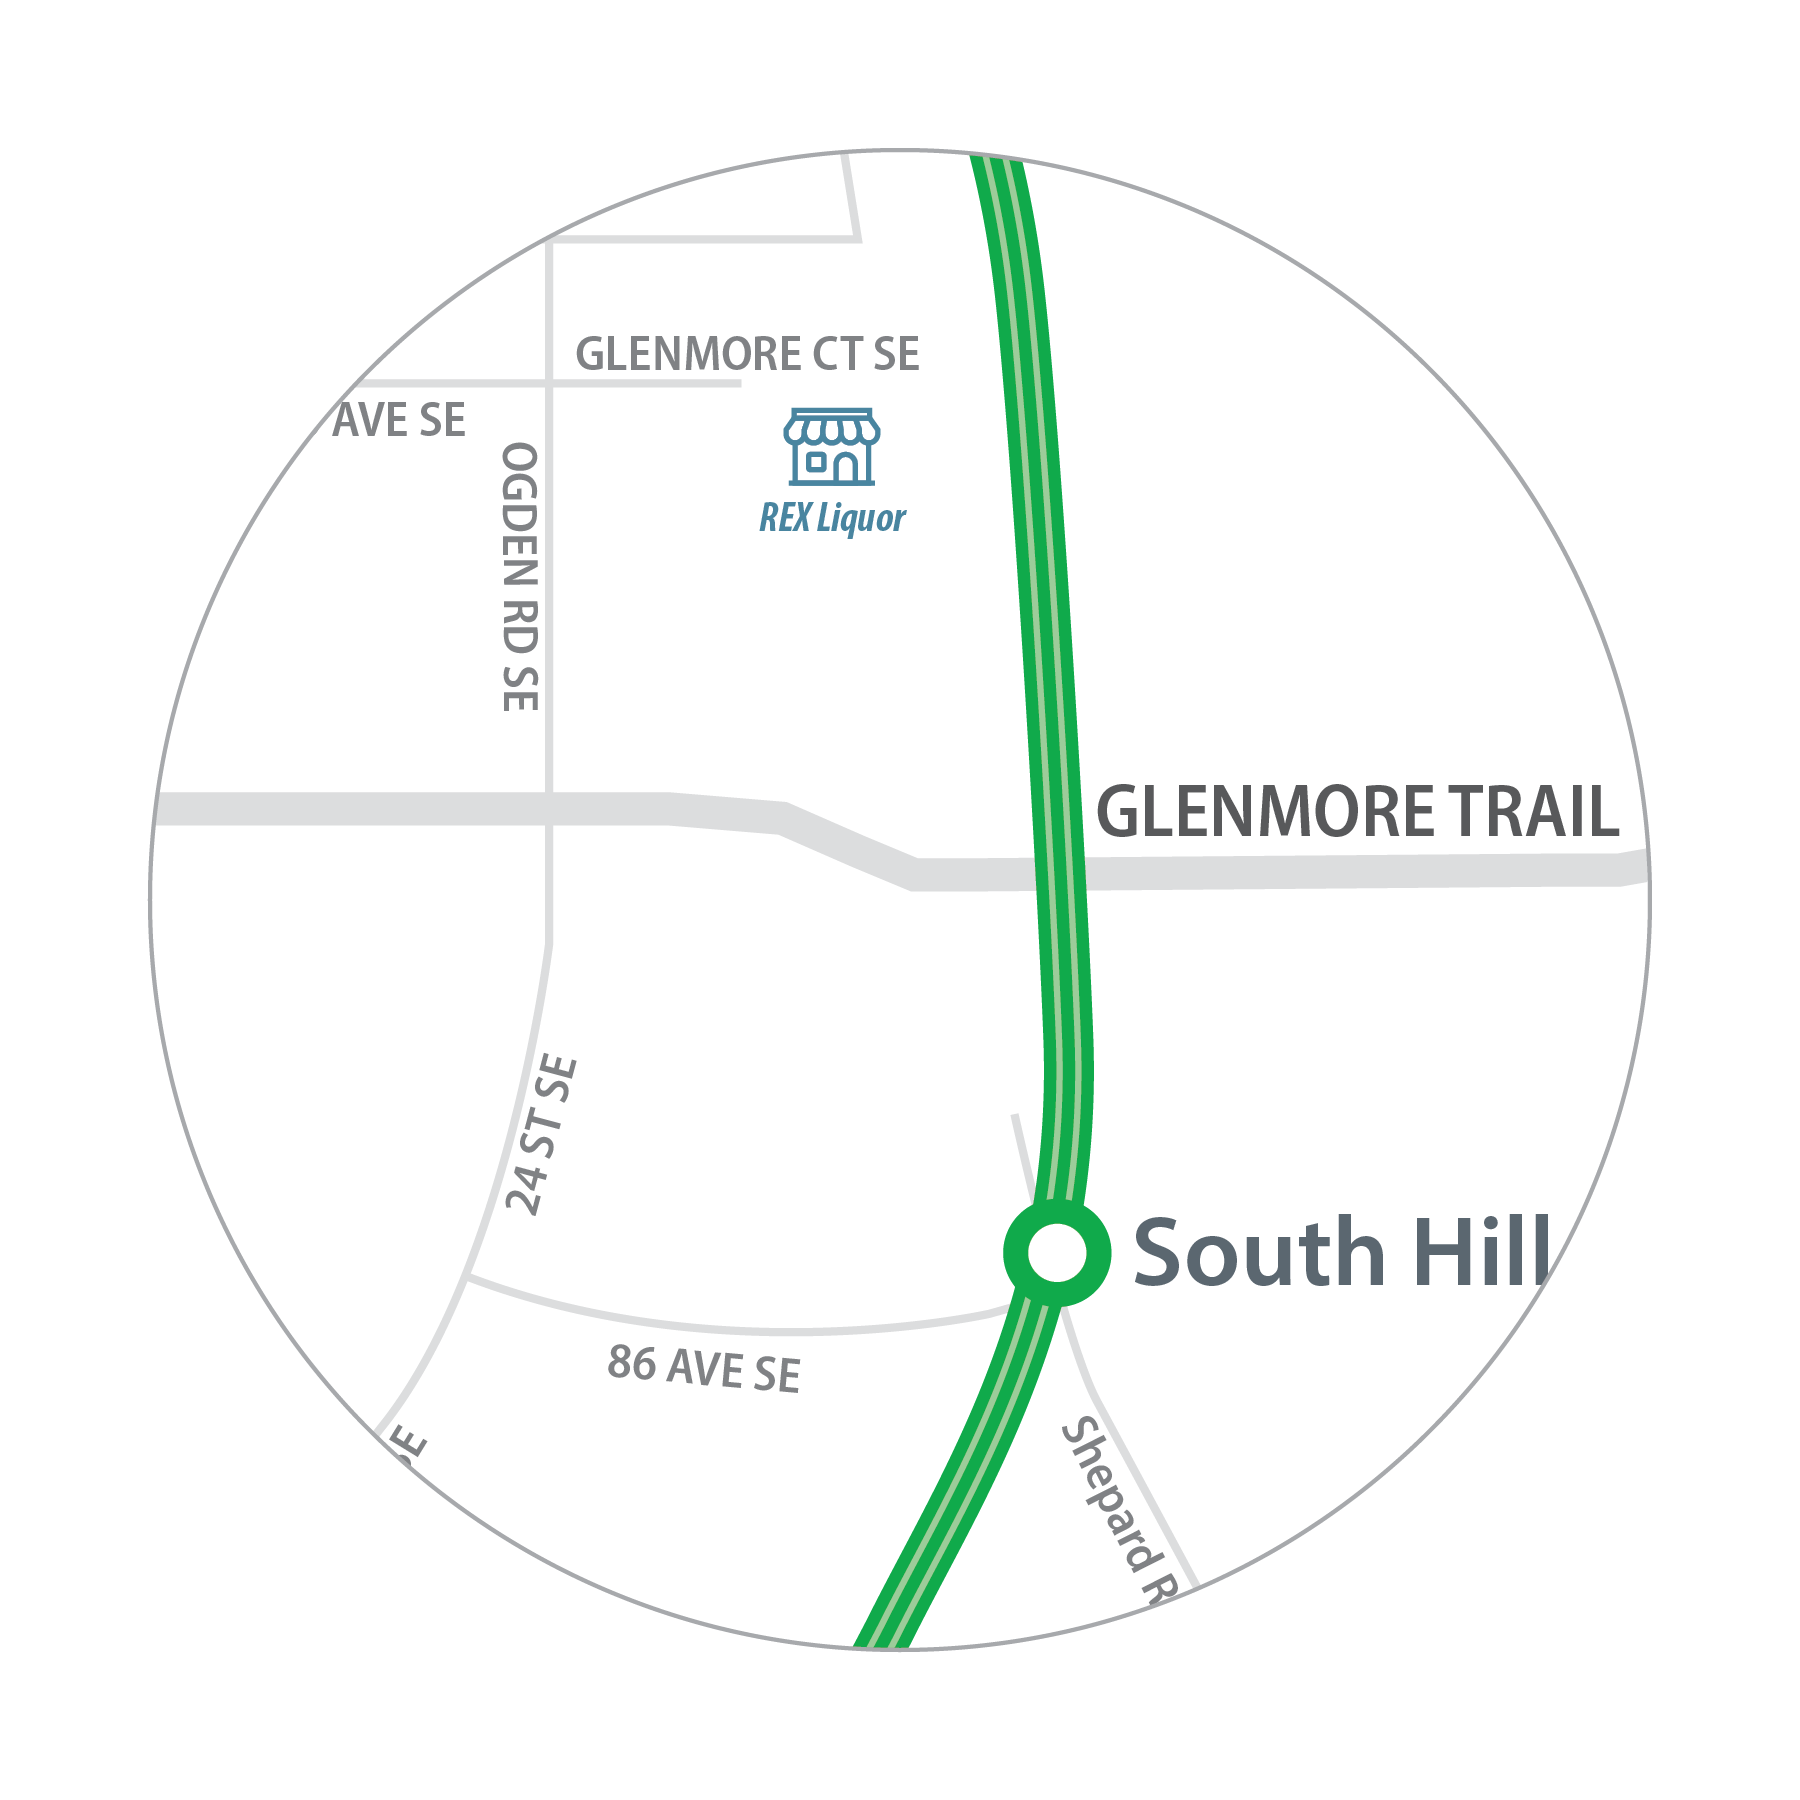 Map of REX Liquor in relation to South Hill Station.